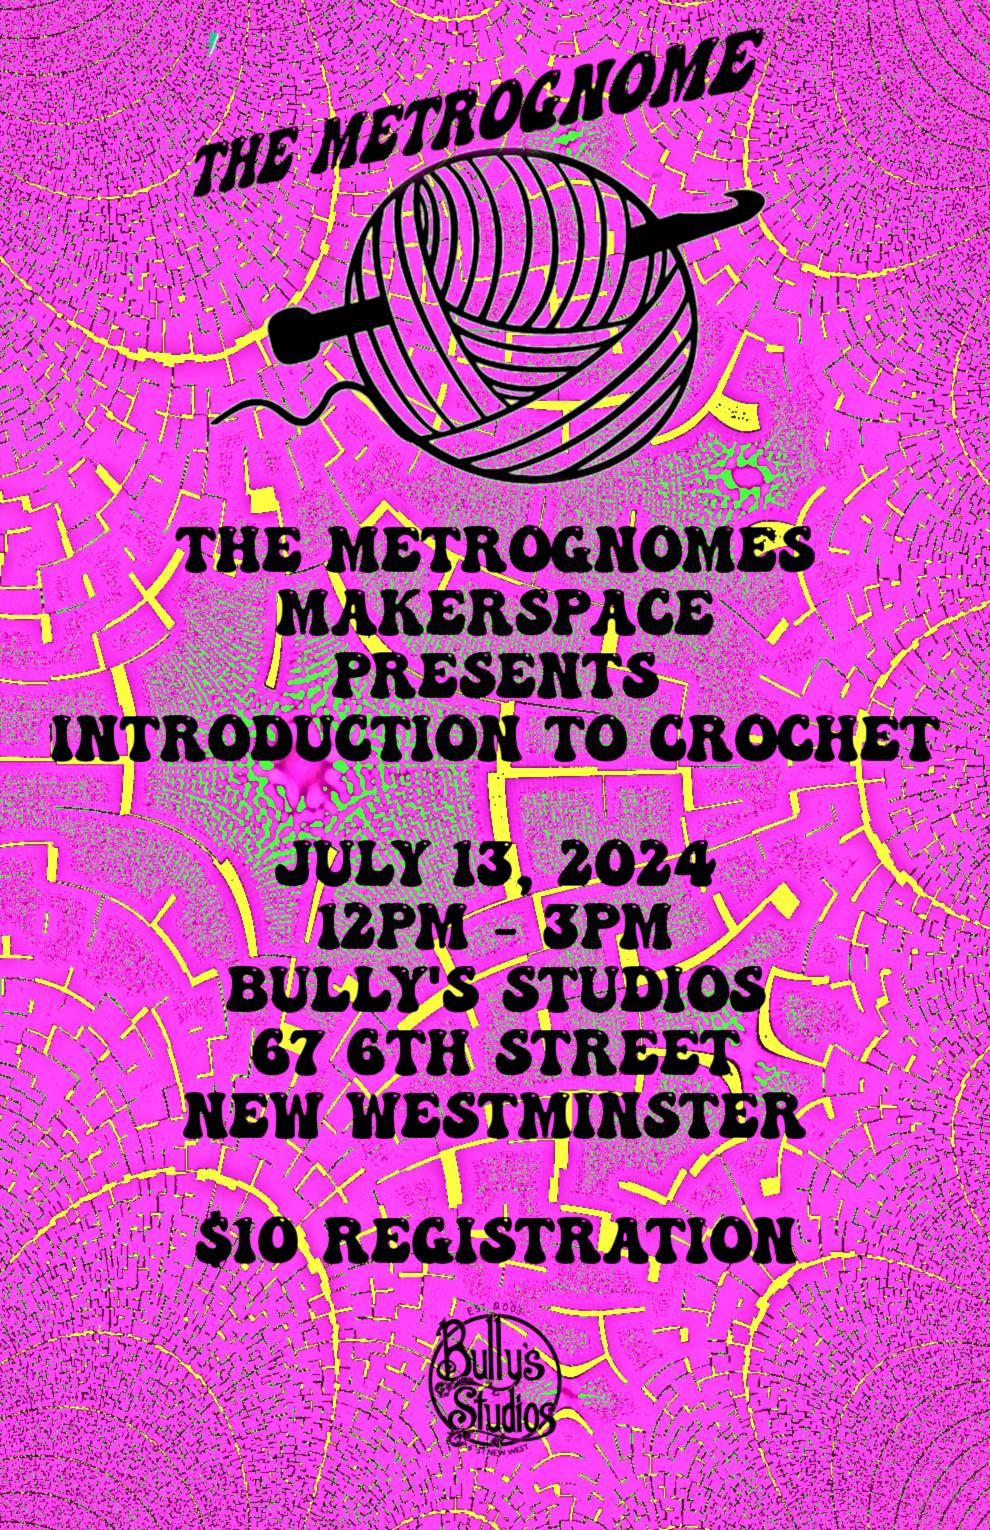 The Metrognomes Makerspace Presents Introduction to Crochet